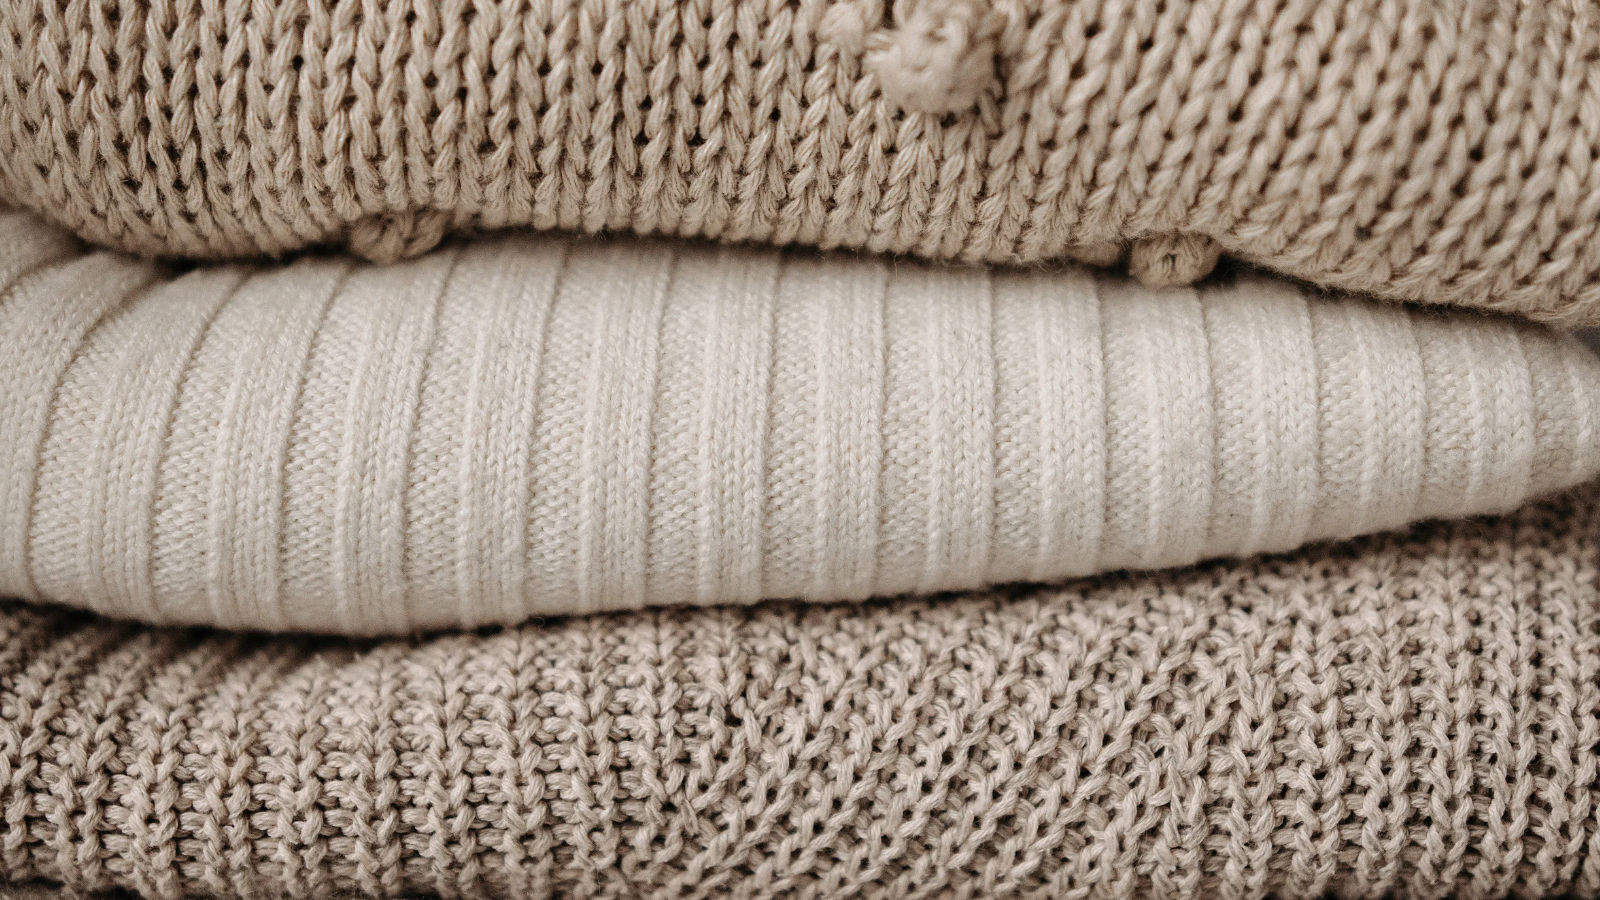 An image of a stack of woollen jumpers